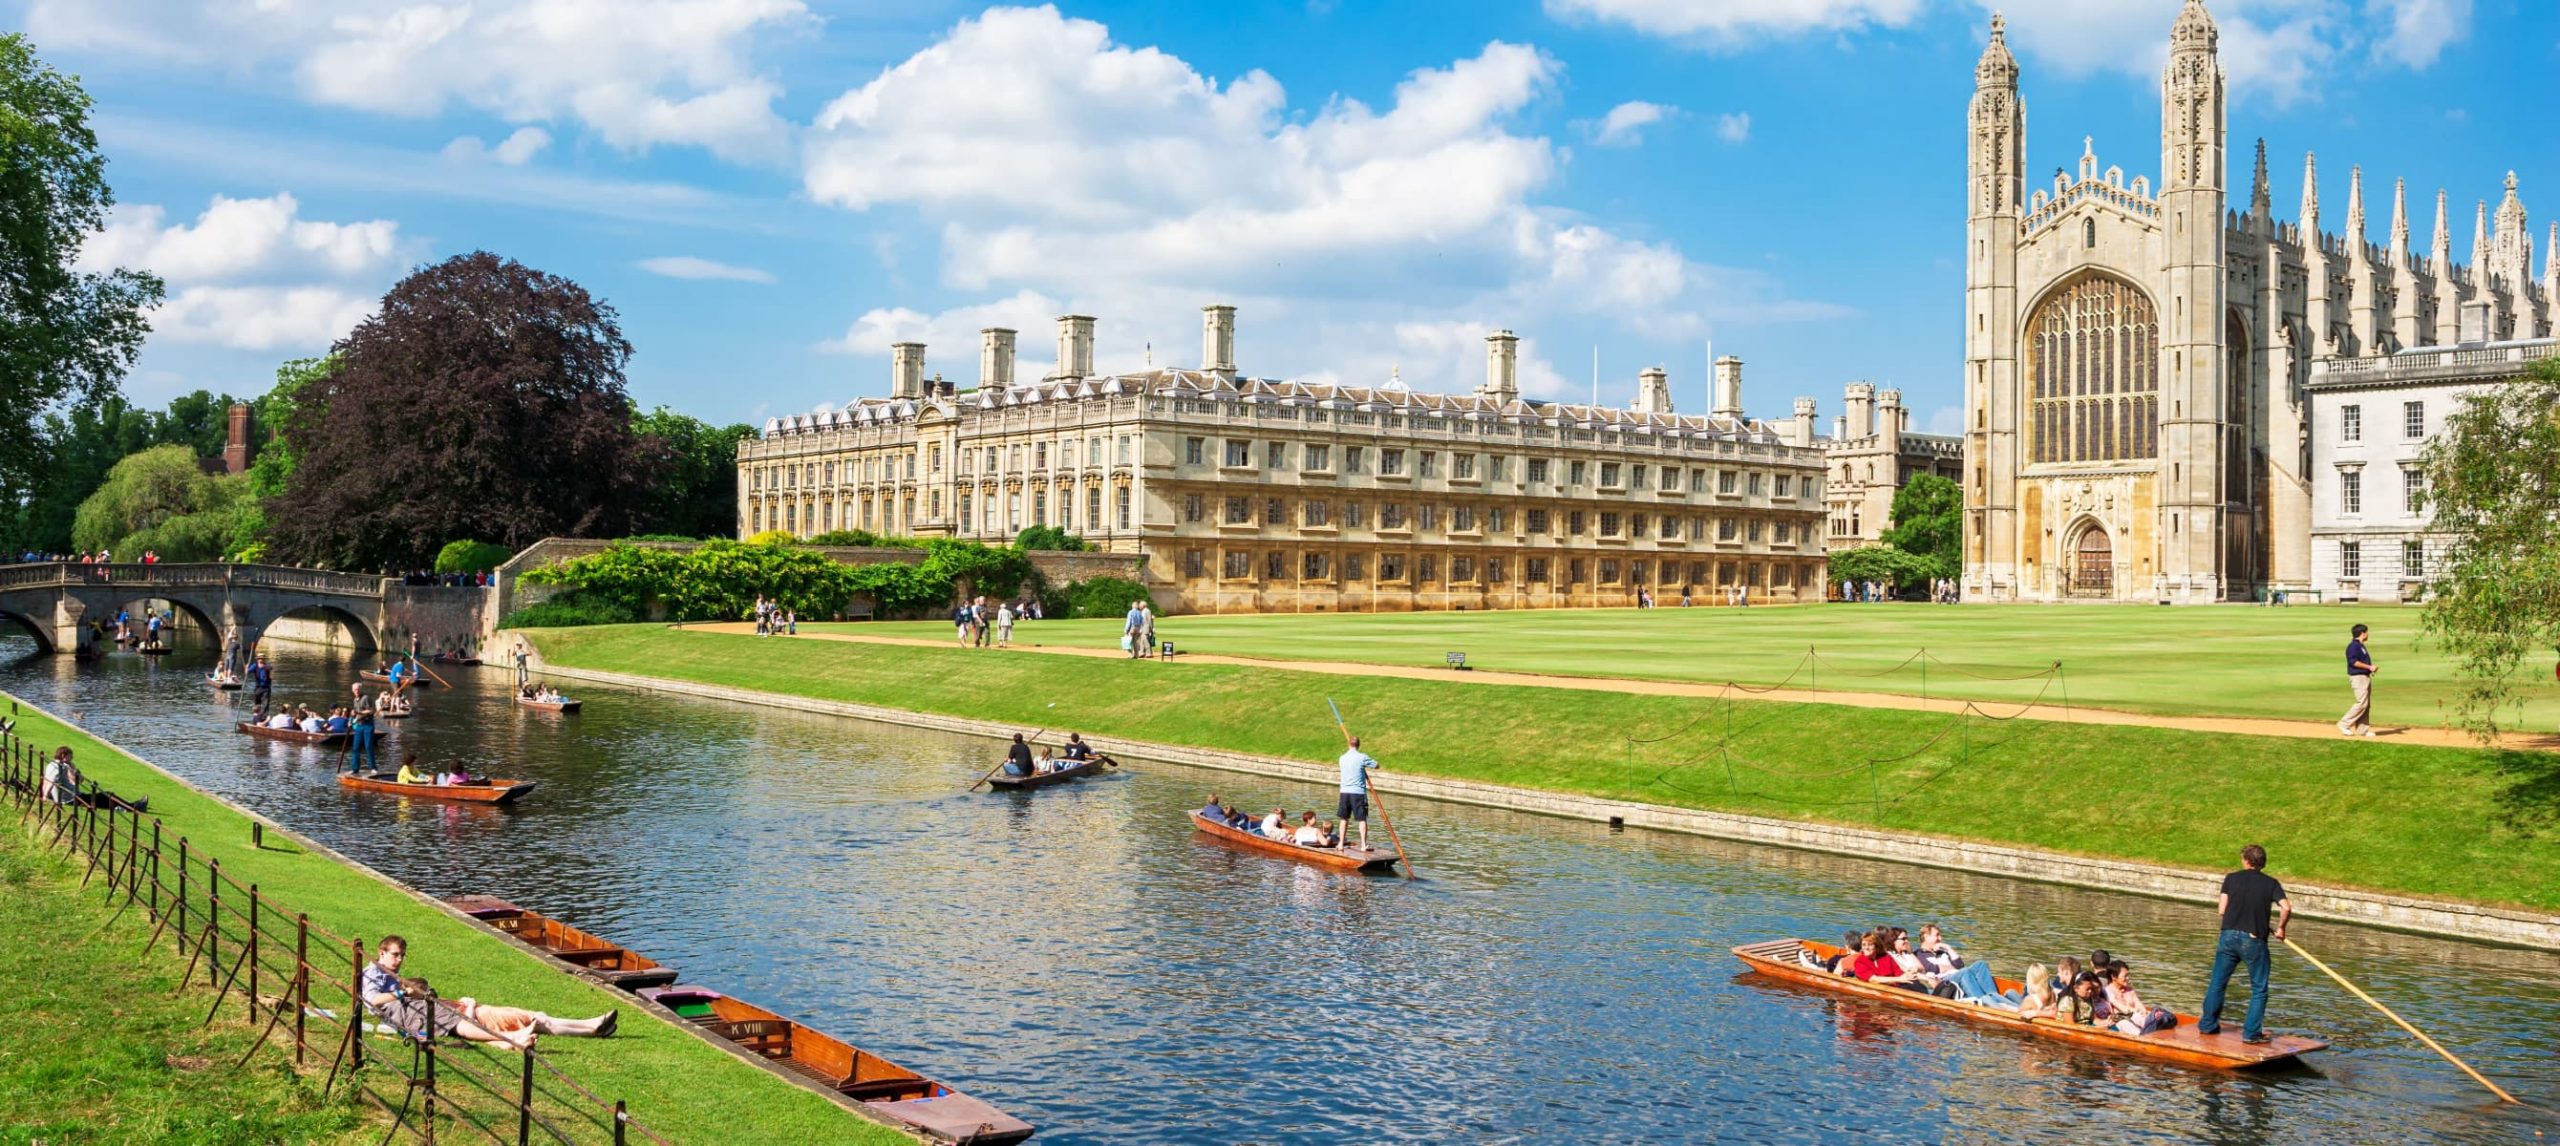 The 10 Best Things To Do In Cambridge, England